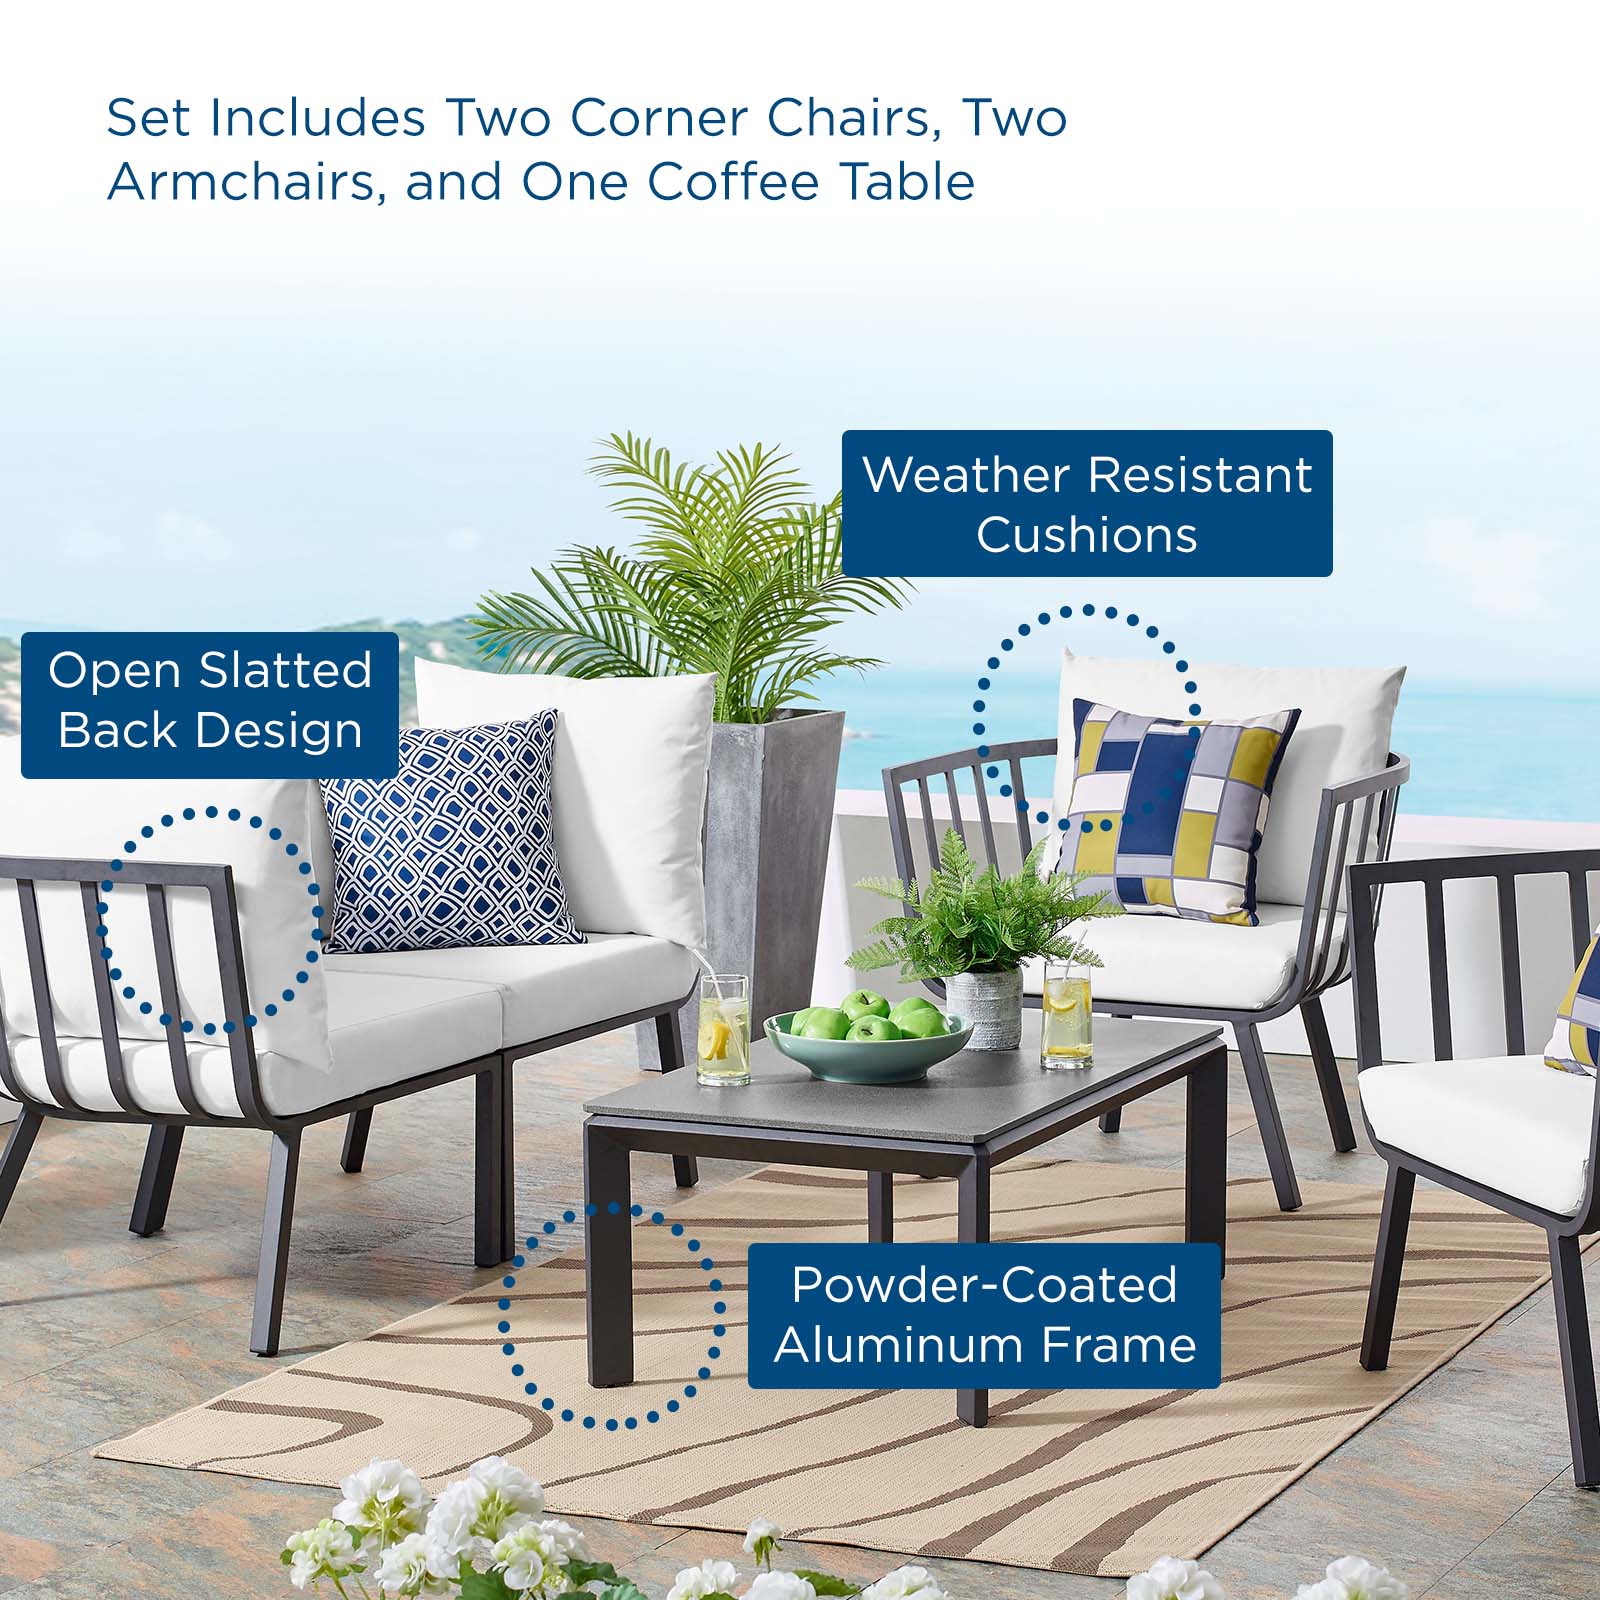 Lounge Sectional Sofa Chair Set, Aluminum, Metal, Steel, Grey Gray White, Modern Contemporary Urban Design, Outdoor Patio Balcony Cafe Bistro Garden Furniture Hotel Hospitality - image 5 of 10